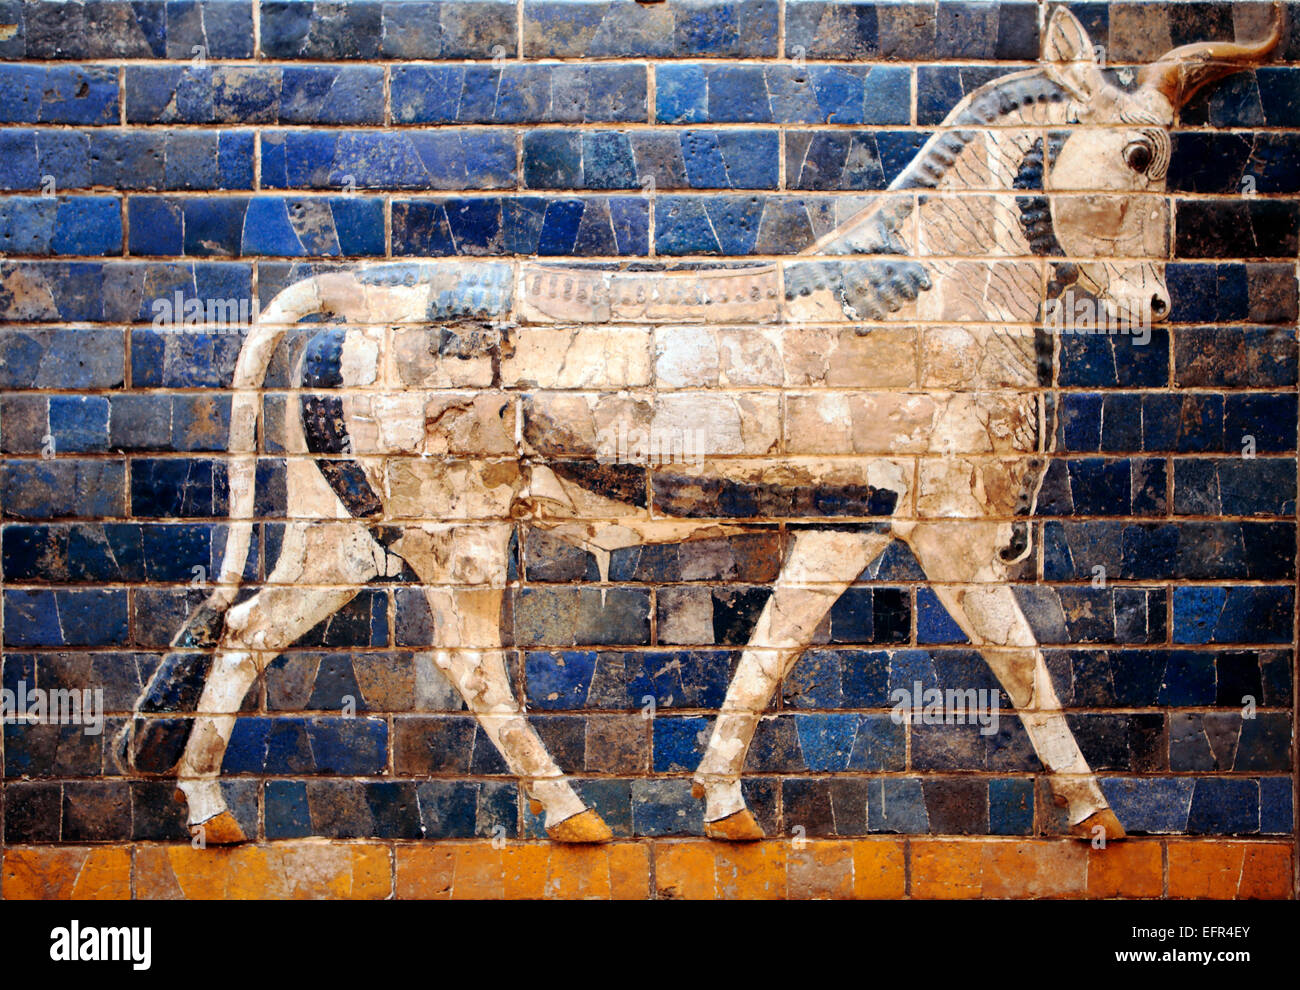 Bull, Model of Ishtar Gate, Istanbul Archaeology Museums, Istanbul, Turkey Stock Photo